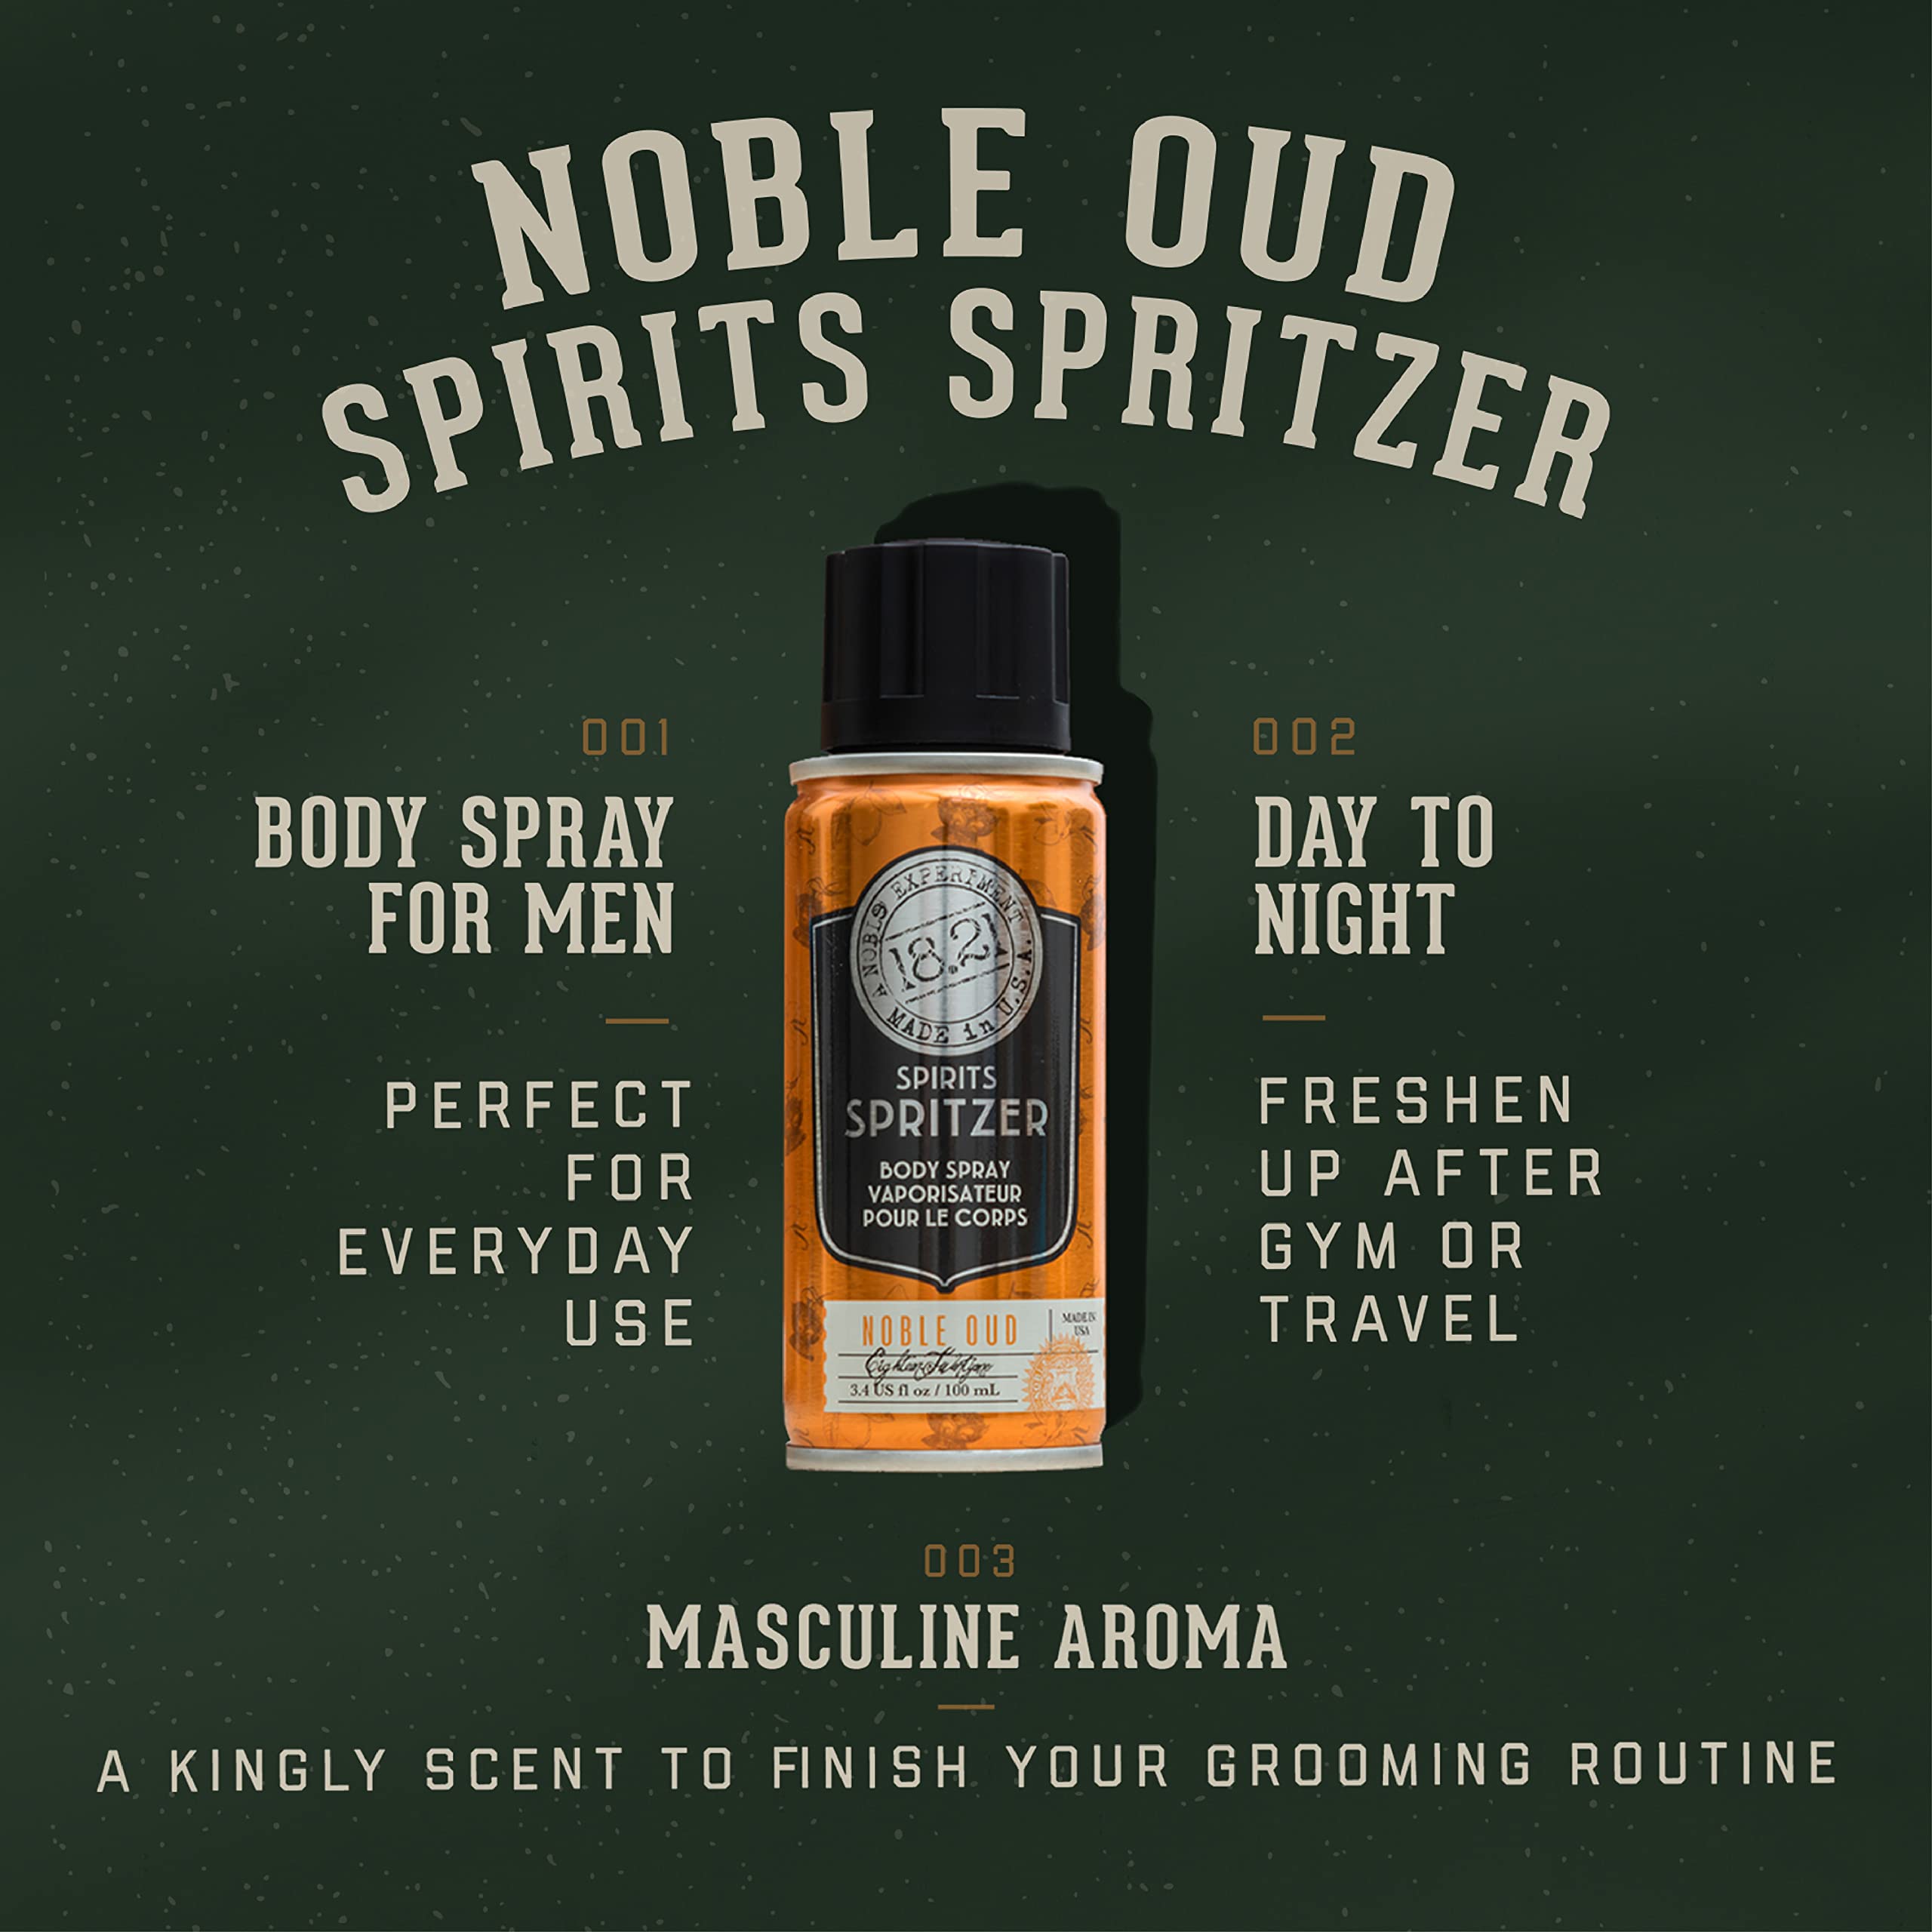 18.21 Man Made Men’s Spirits Spritzer, 3.4 oz. - Long-Lasting All Over Body Spray with Masculine Aromatics - Gifts for Him